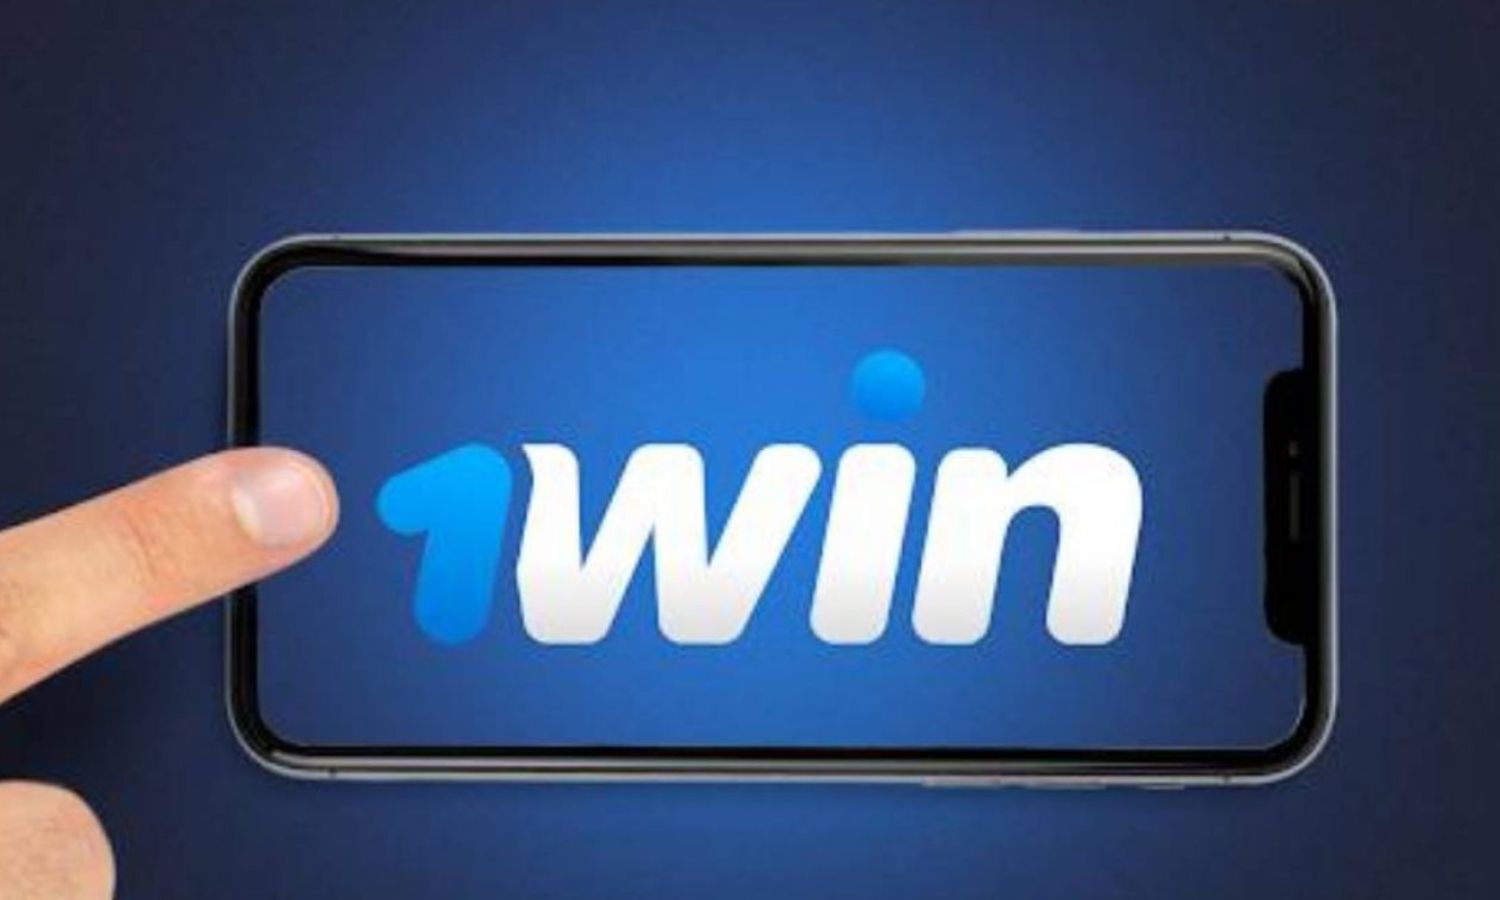 1Win: Where India Bets and Plays – Join Over 1 Million Satisfied Customers